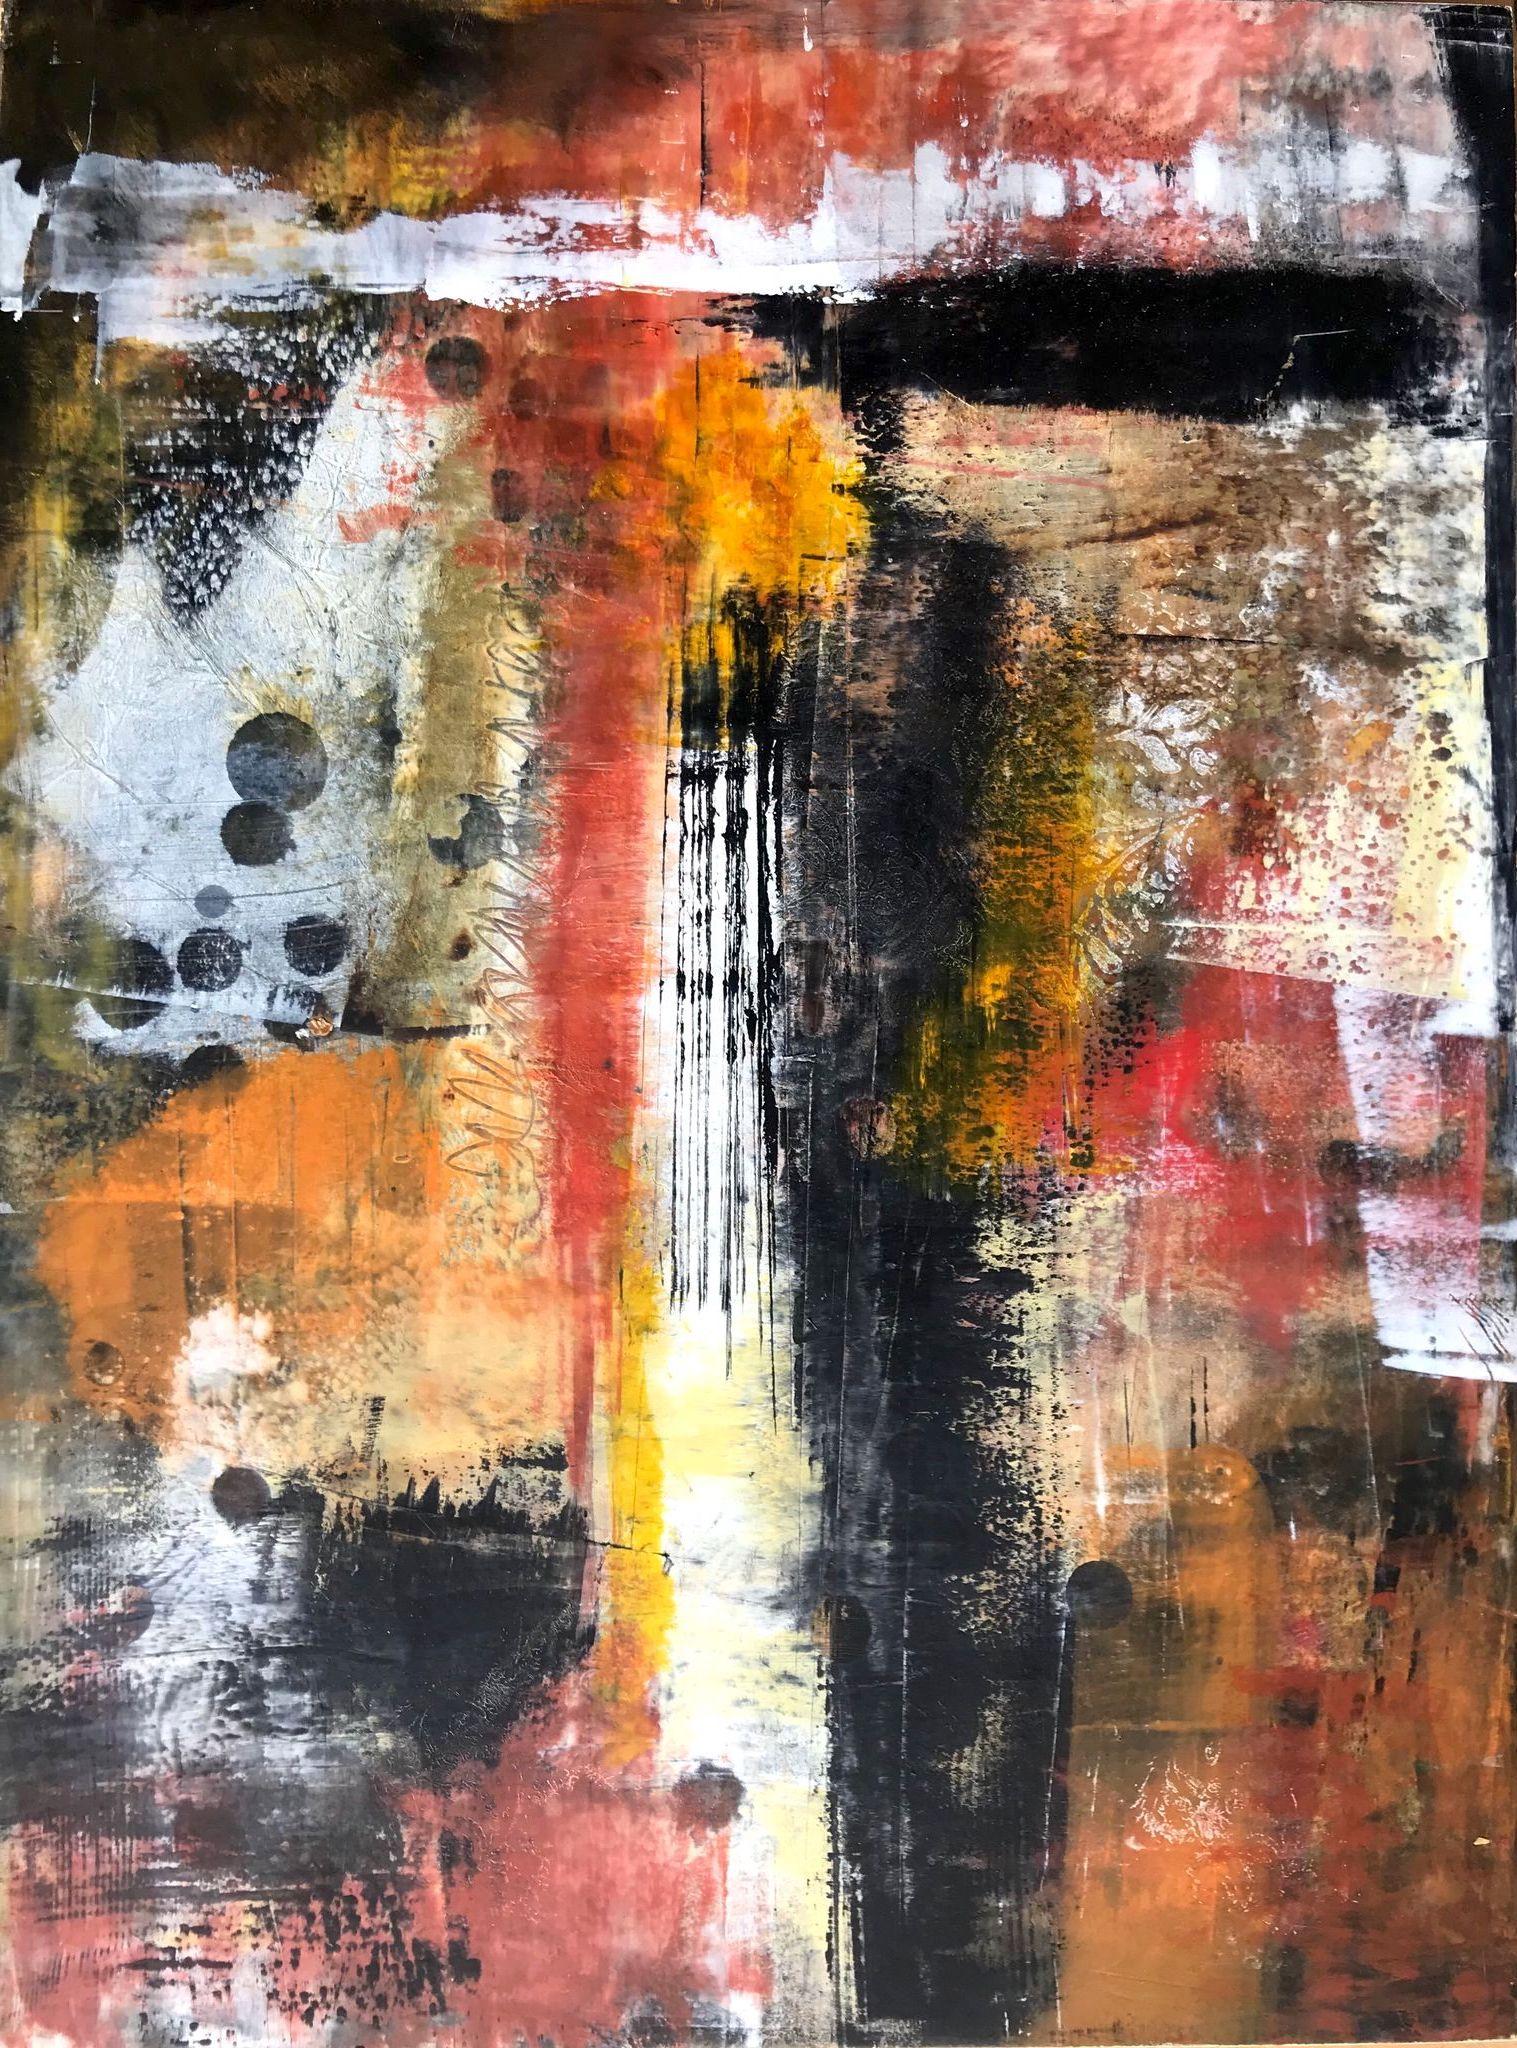 This 16 x 12 inch piece by Sandi Neiman is a dynamic composition featuring red, orange, yellow, black and white. The piece is executed in cold wax on wood panel. Neiman is a therapist by trade and integrates her experience into her art. She